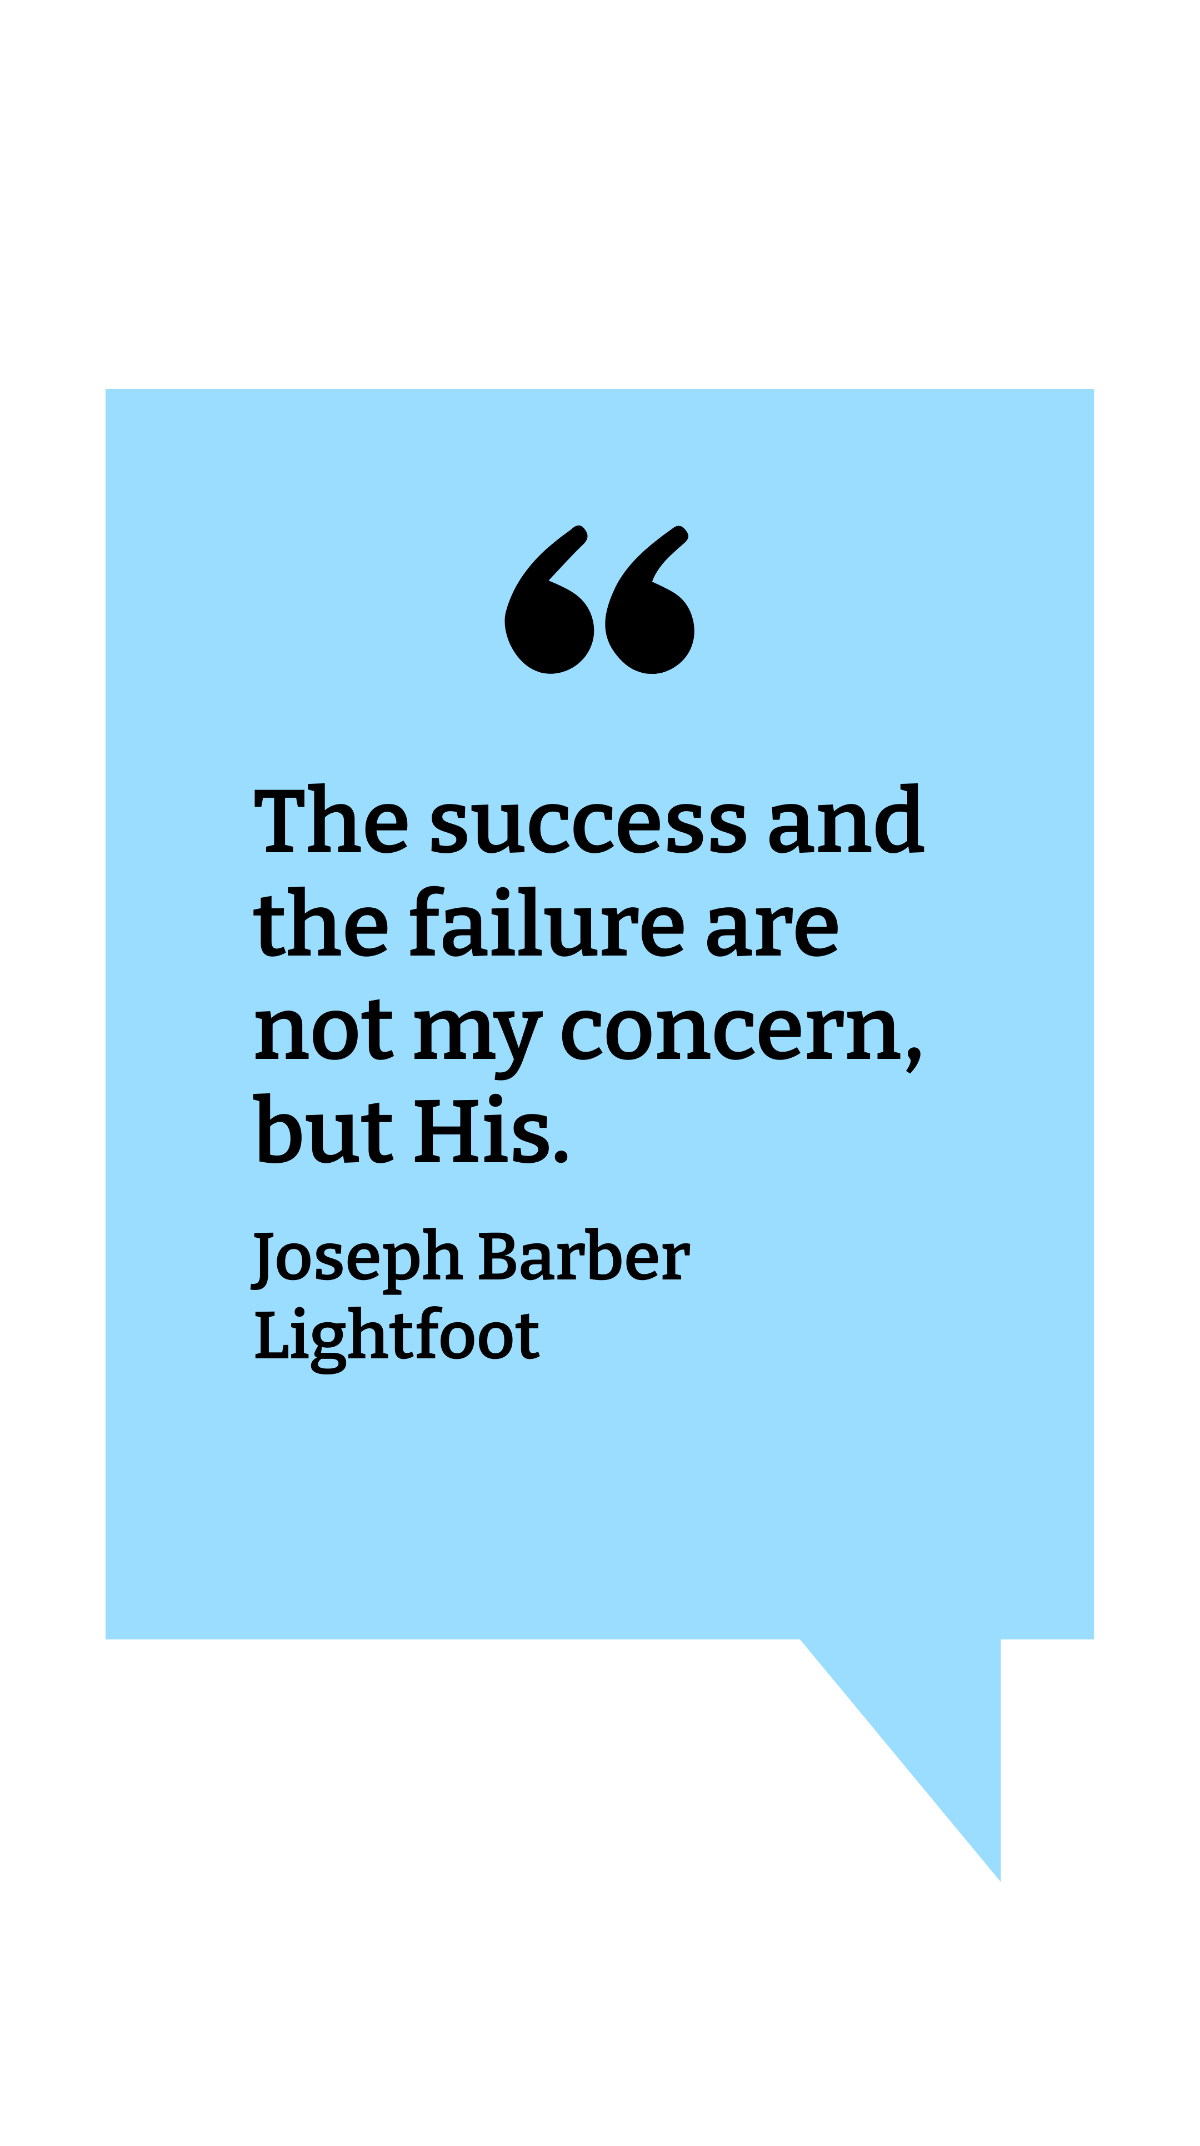 Joseph Barber Lightfoot - The success and the failure are not my concern, but His.